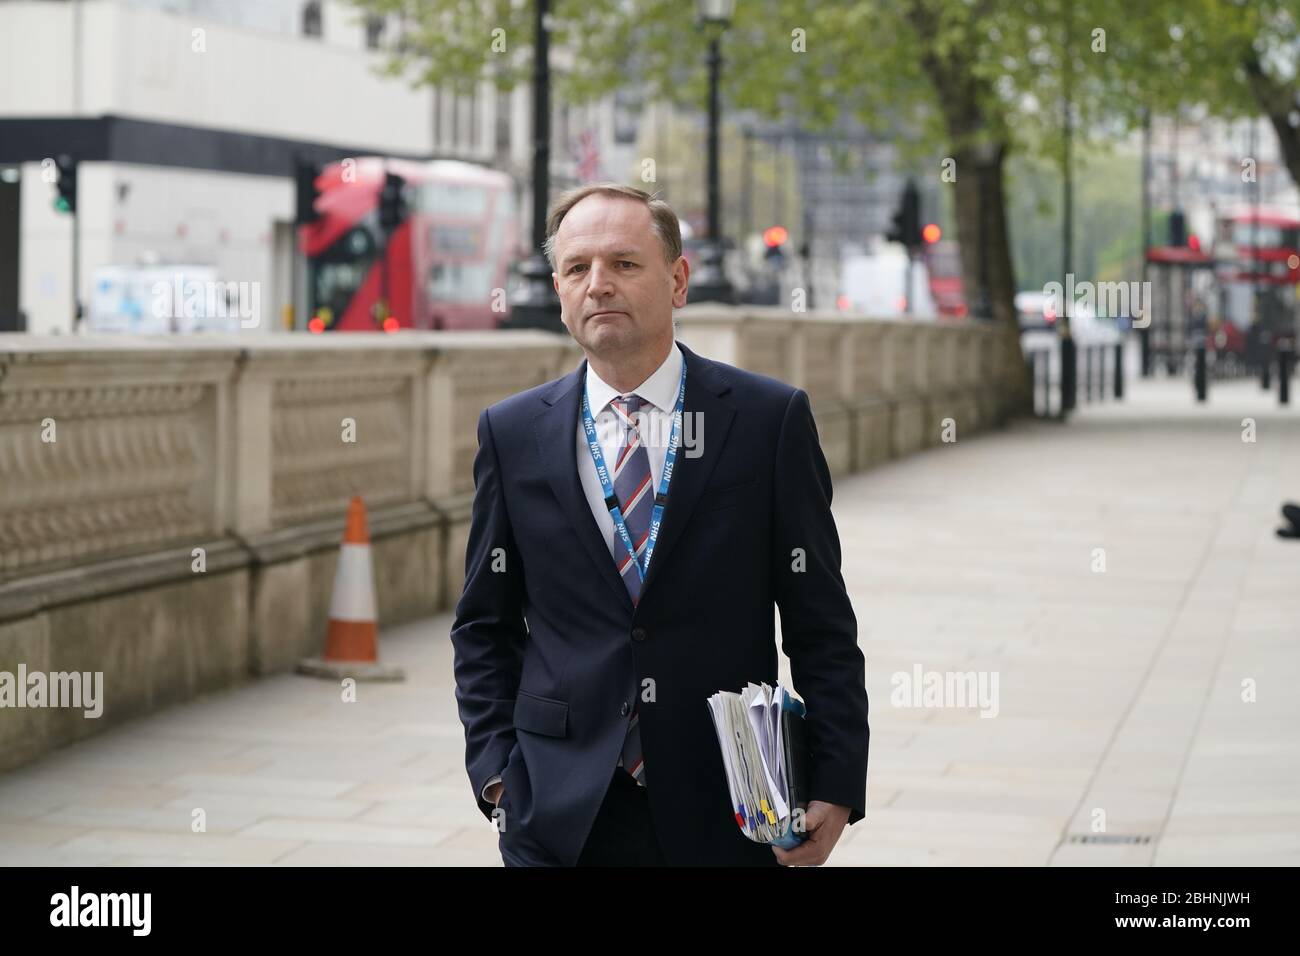 Sir Simon Stevens, Chief Executive of the National Health Service in England, in Whitehall on the day that the Prime Minister returned to work in Downing Street for the first time since he was hospitalised with coronavirus. Stock Photo